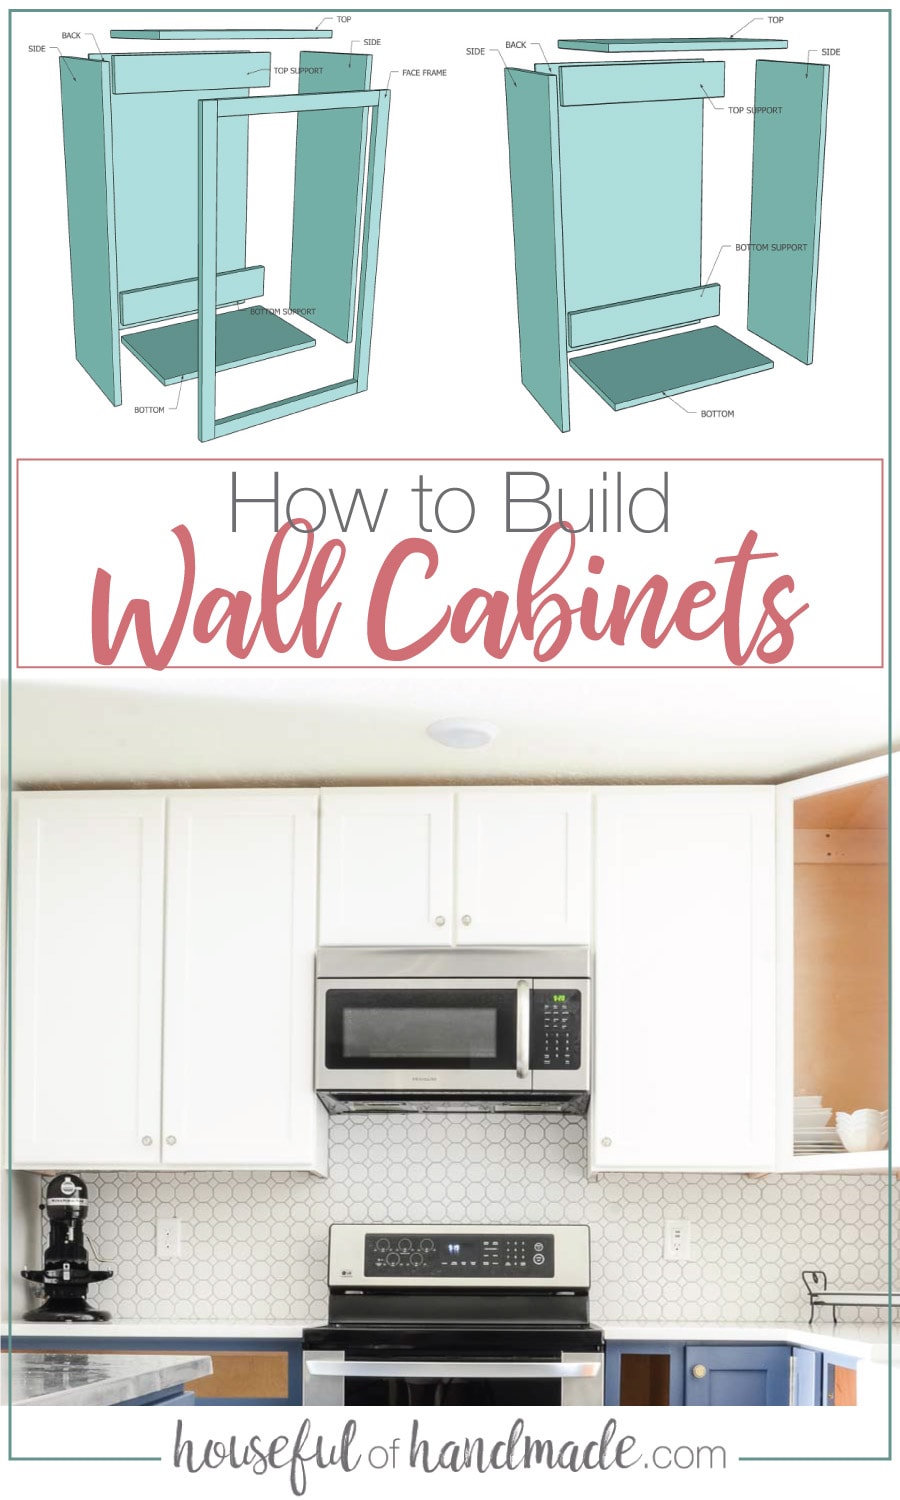 How to Build Wall Cabinets - Houseful of Handmade